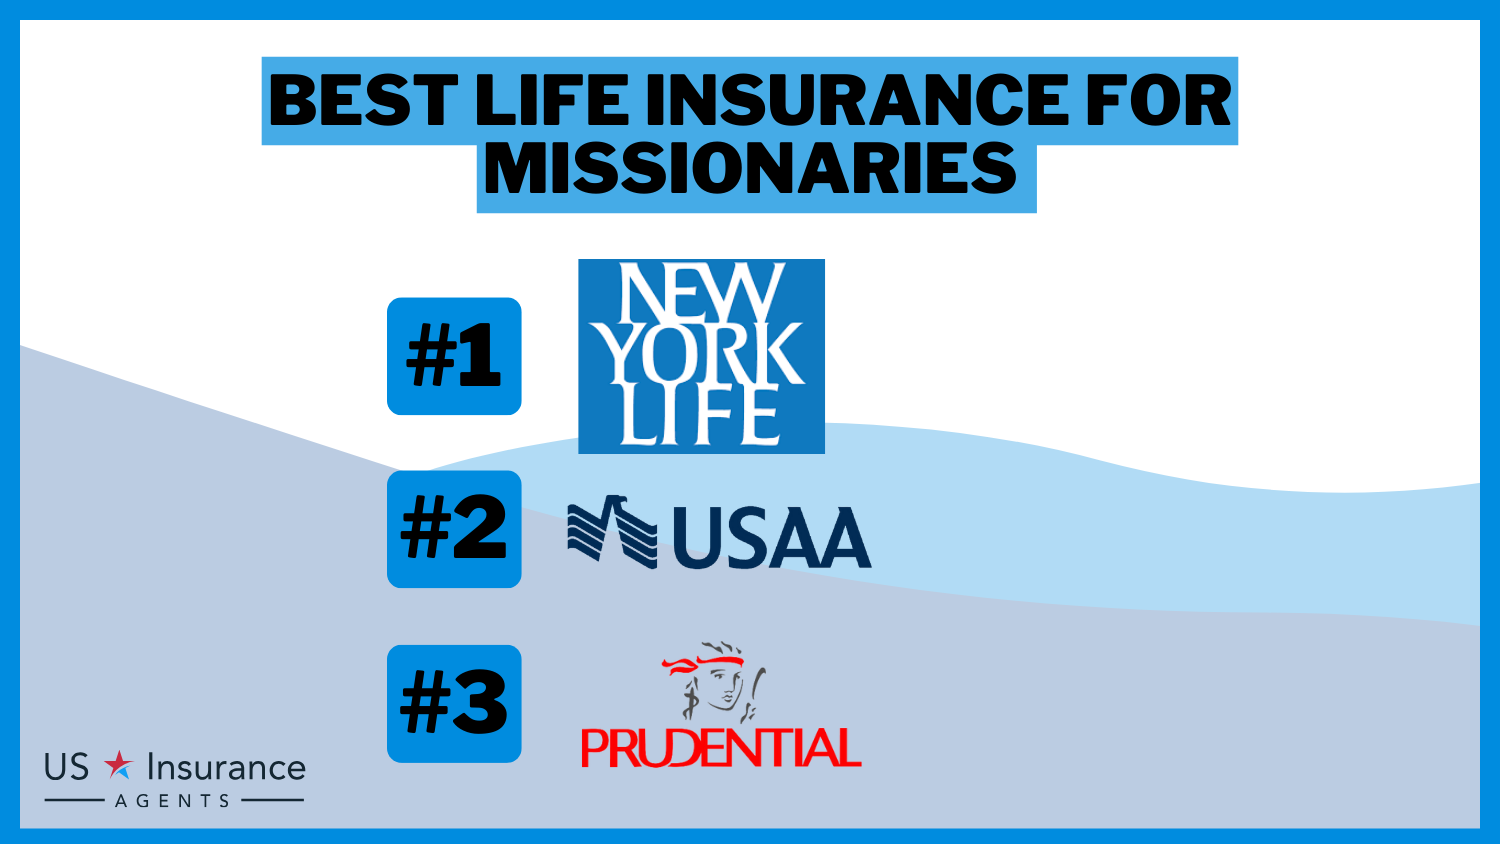 3 Best Life Insurance for Missionaries-USIA: New York Life, USAA, and Prudential.